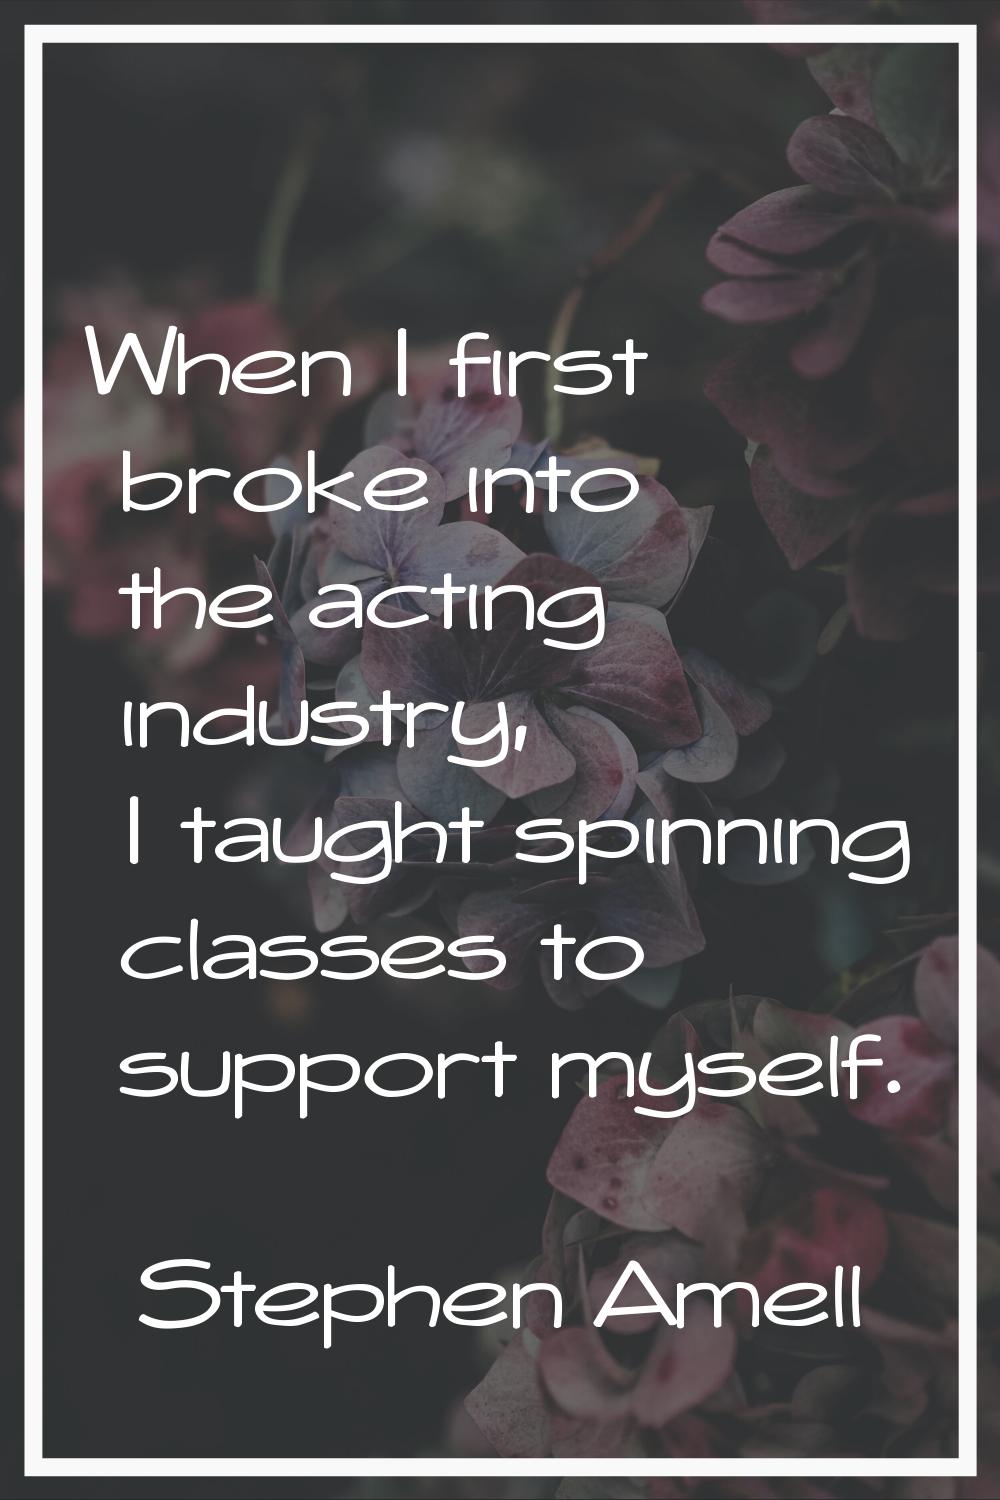 When I first broke into the acting industry, I taught spinning classes to support myself.